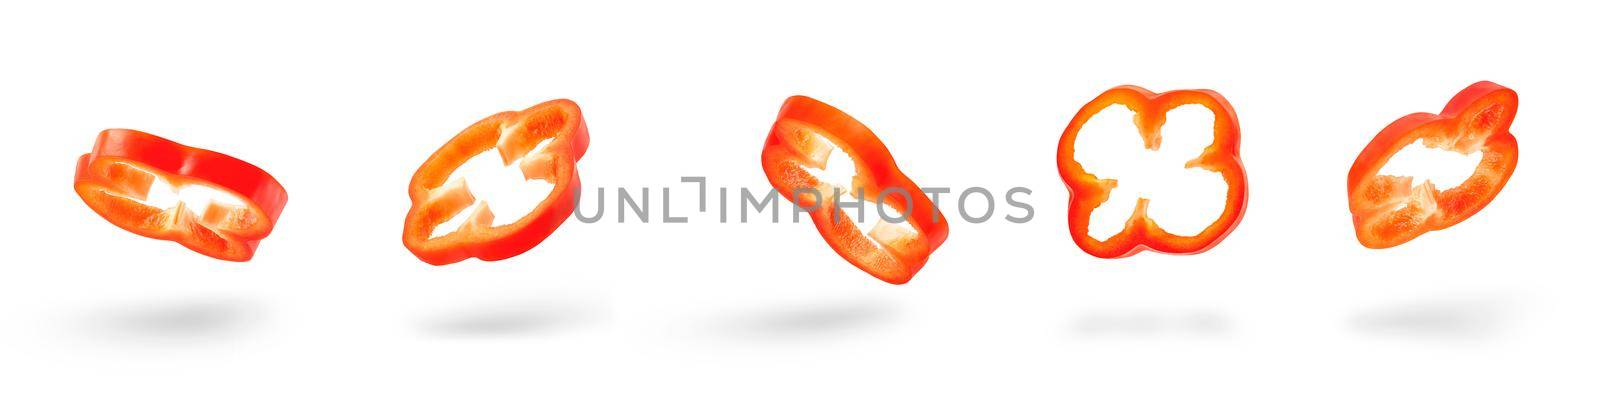 Set of slices of red pepper drops on a white background. Paprika flying in air on isolated white background.